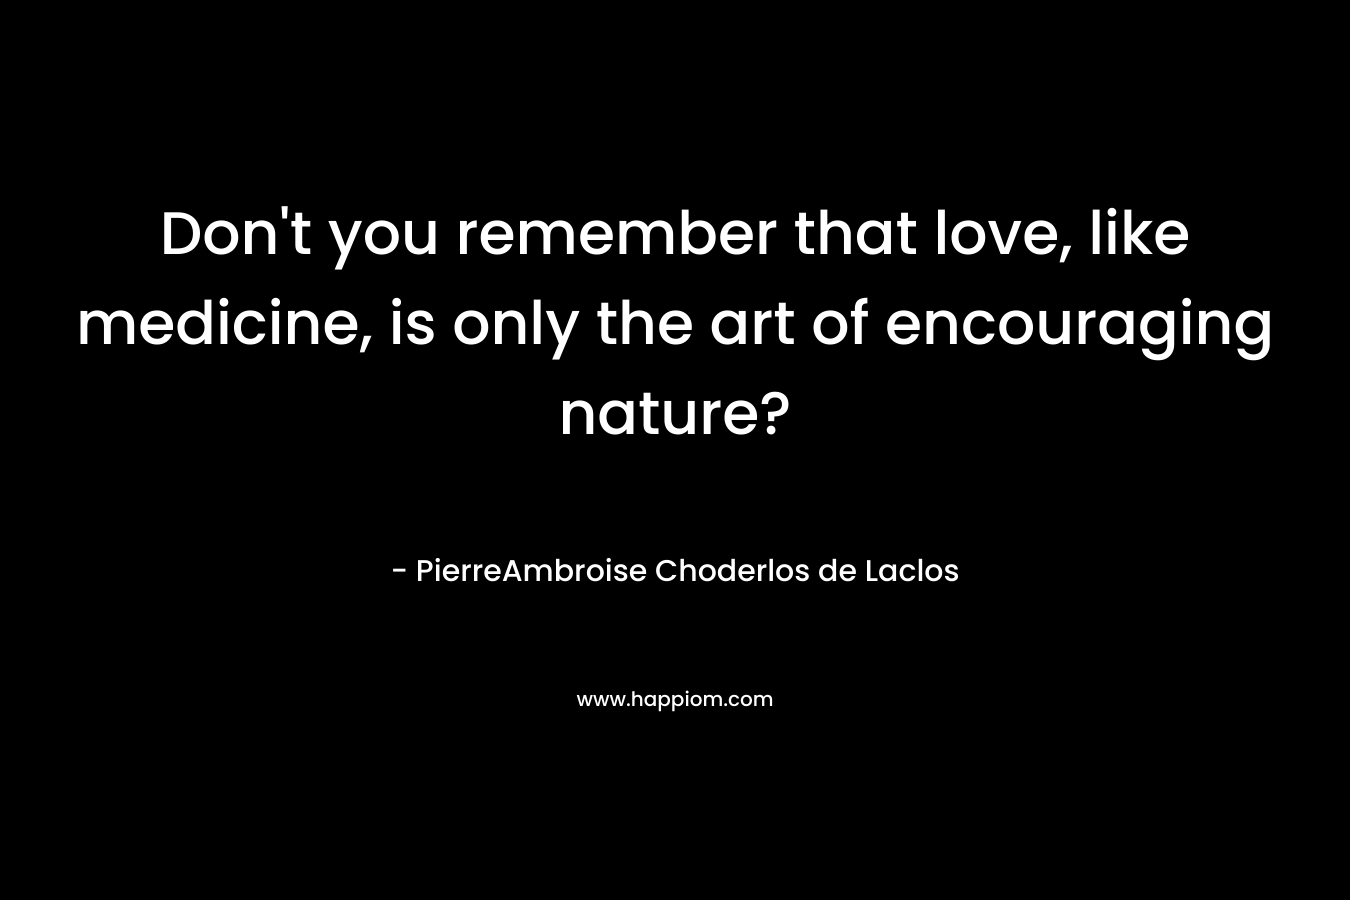 Don't you remember that love, like medicine, is only the art of encouraging nature?